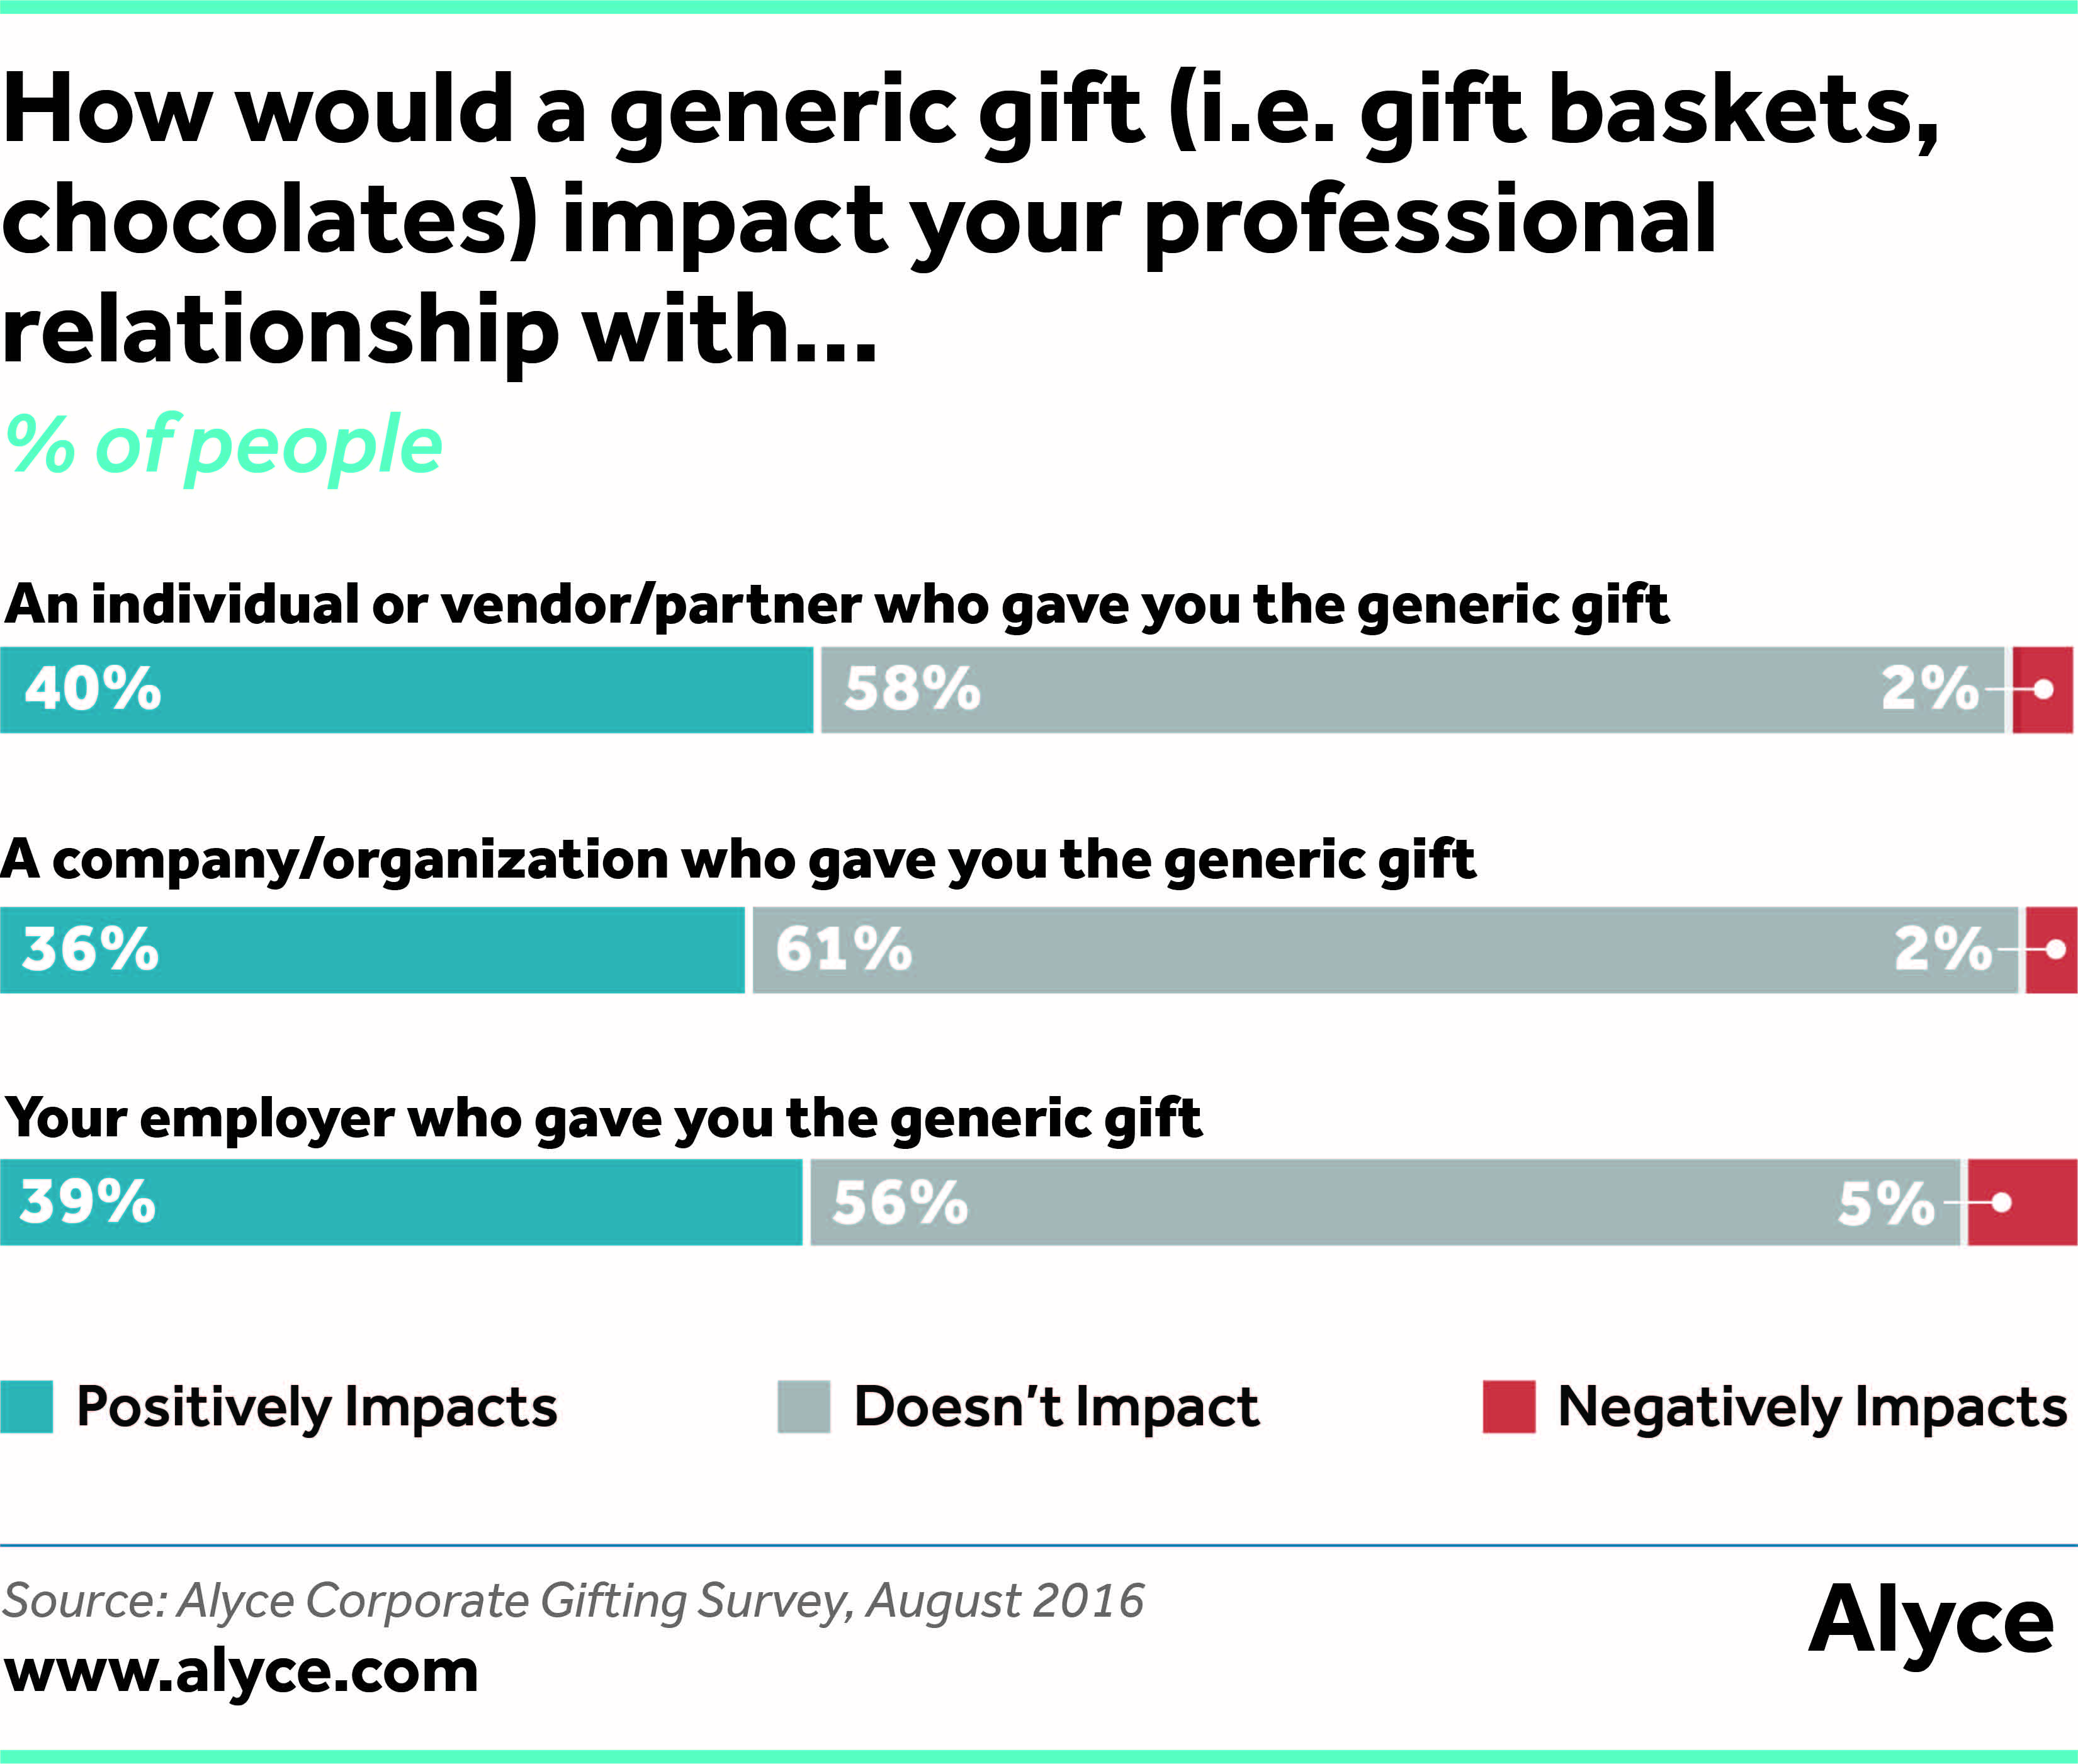 How would a generic gift (i.e. gift baskets, chocolates) impact your professional relationship with...